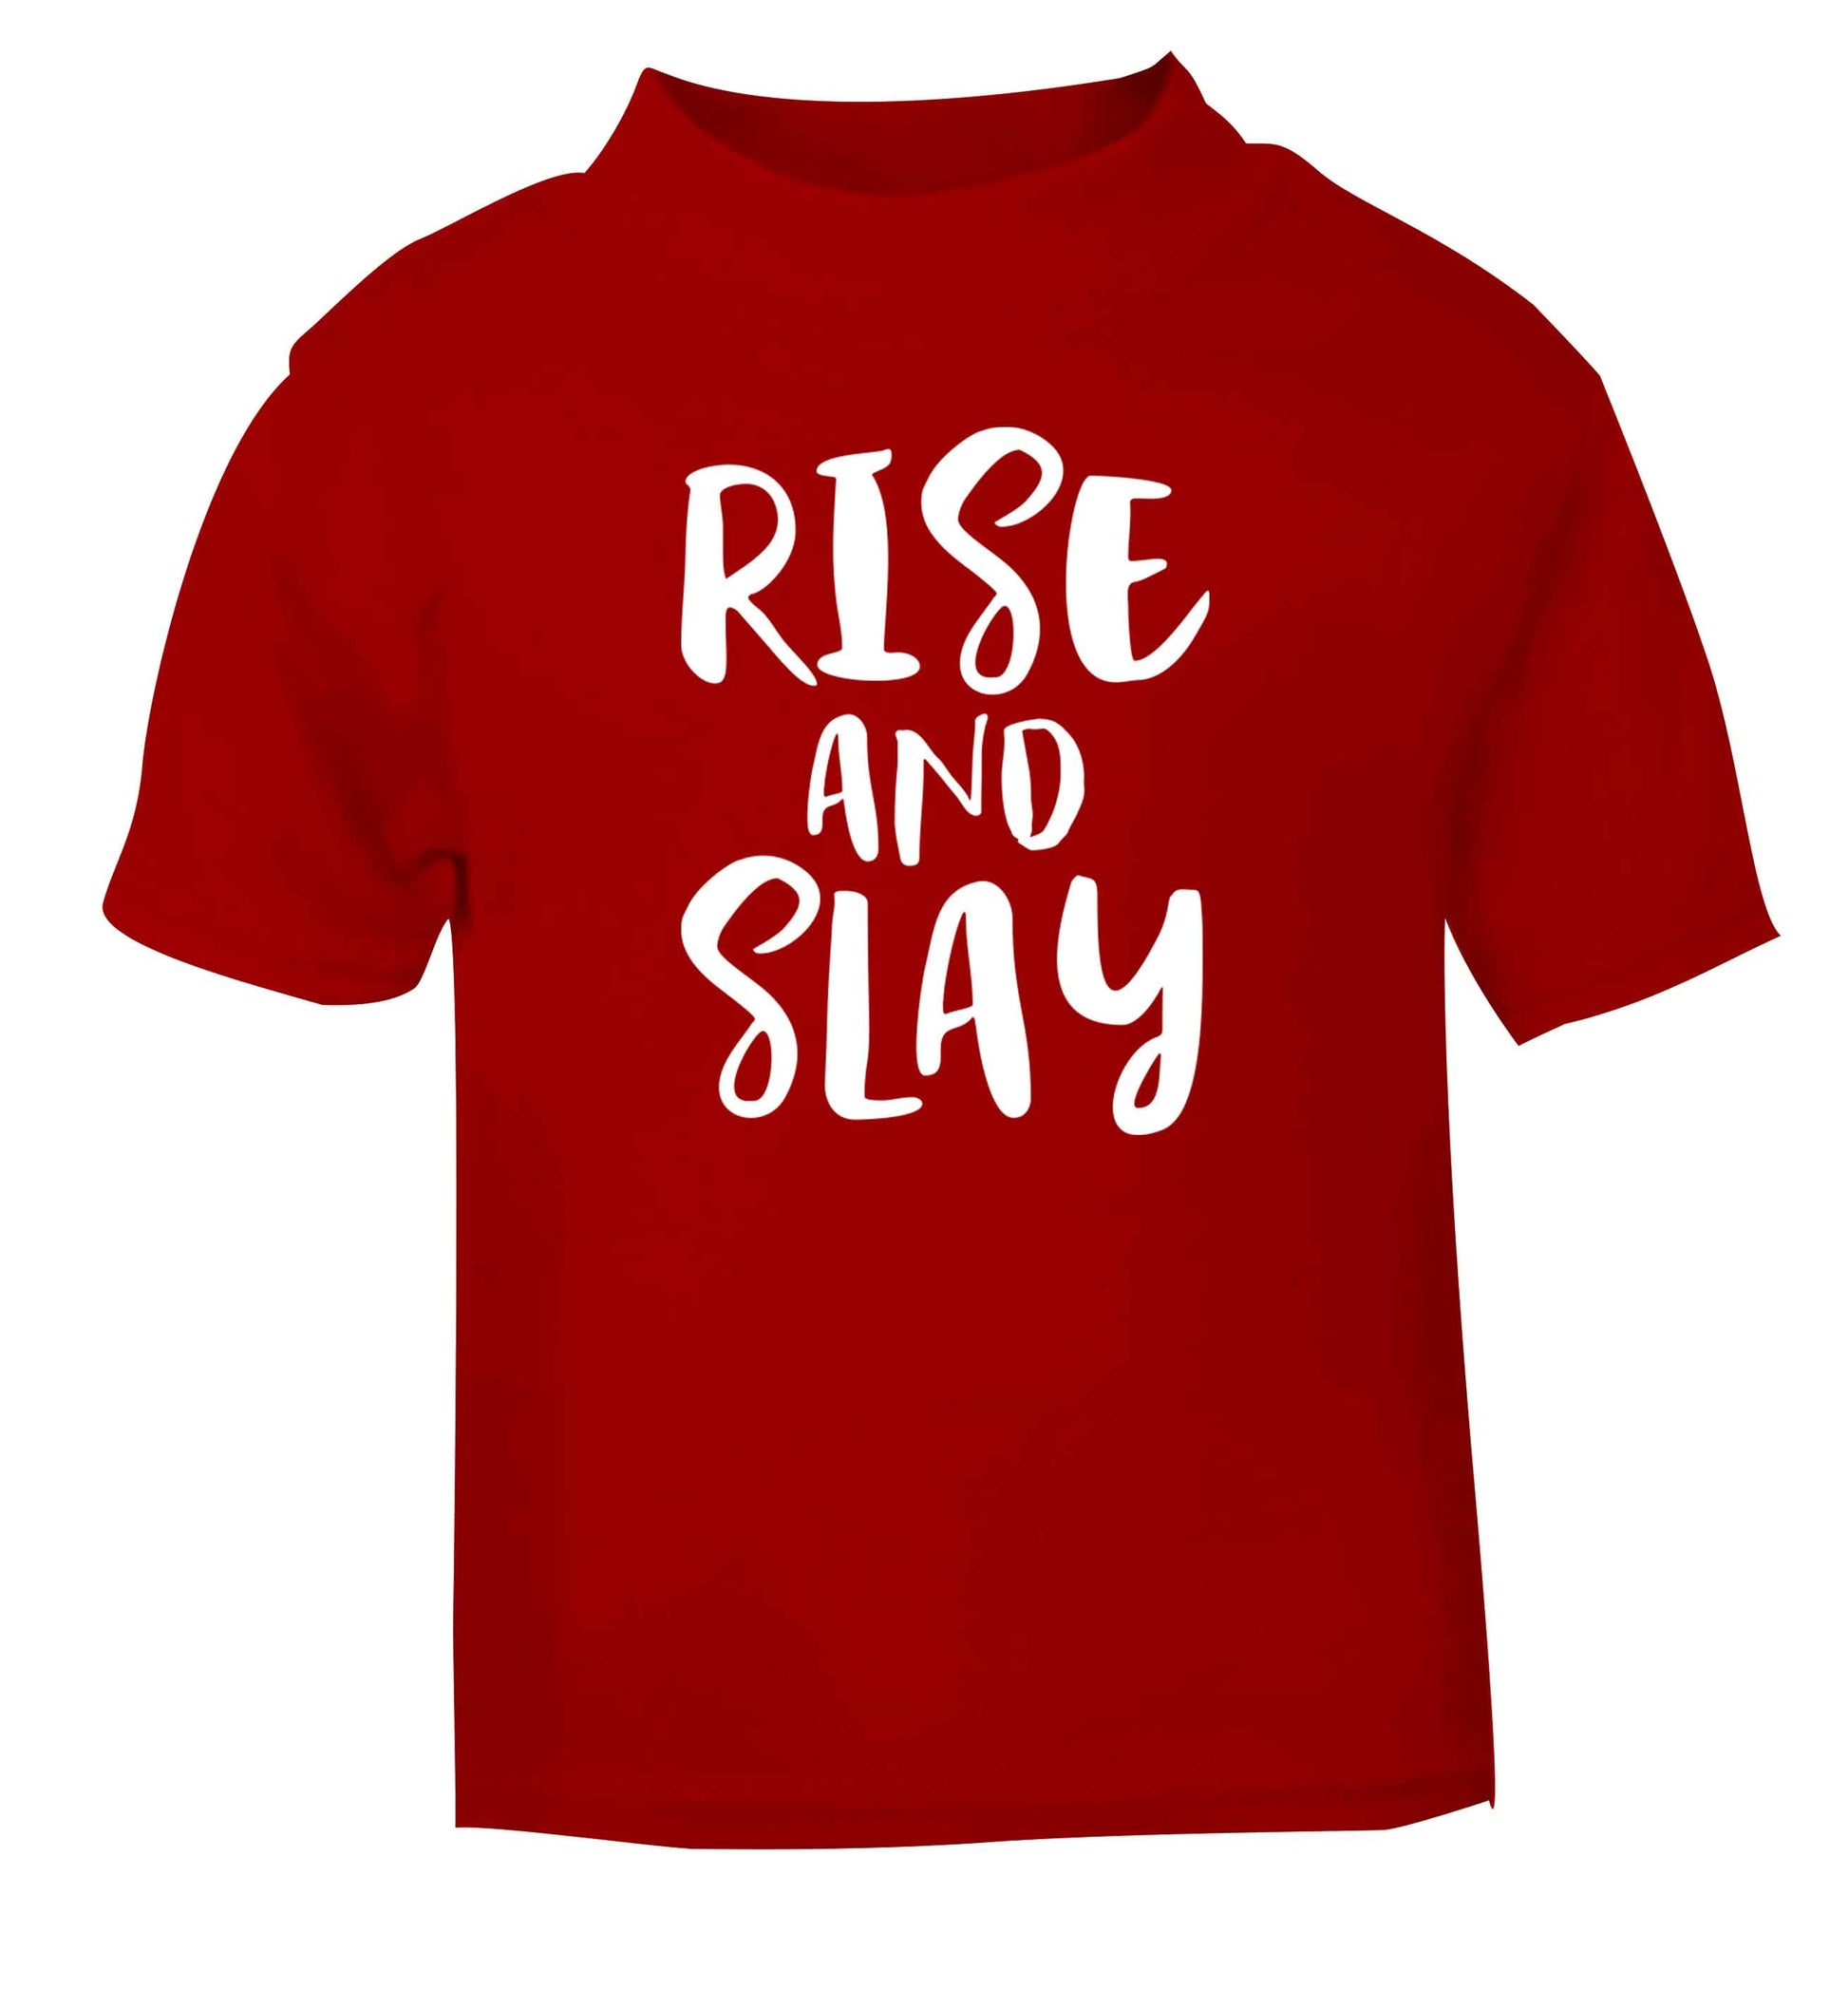 Rise and slay red Baby Toddler Tshirt 2 Years